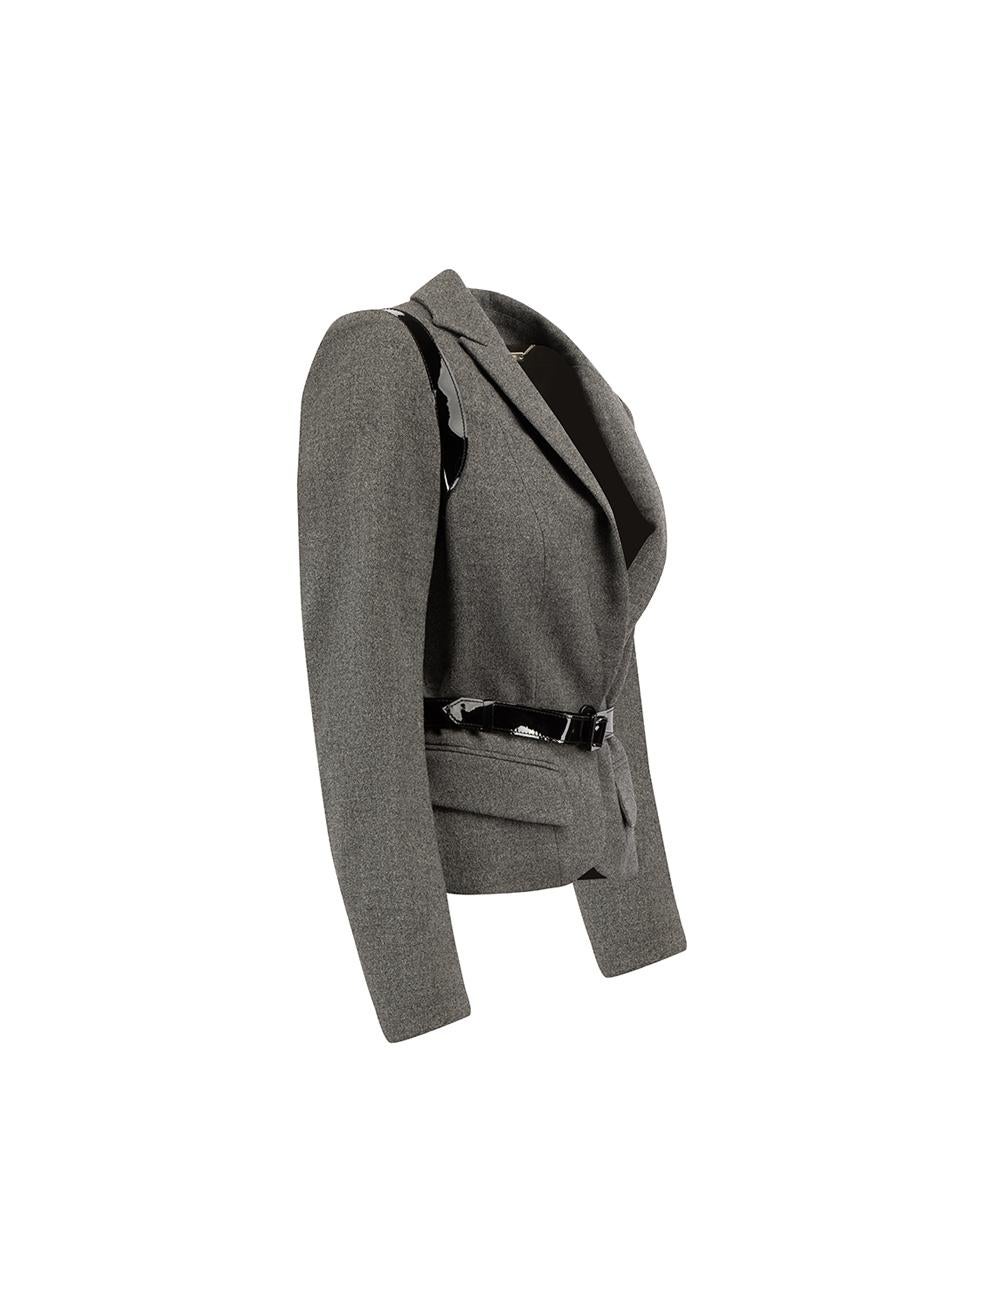 CONDITION is Good. Minor wear to blazer is evident. Light wear to wool with small hole at front right shoulder on this used Alexander McQueen designer resale item.



Details


Grey

Wool

Short length blazer

Single breasted

Patent leather harness